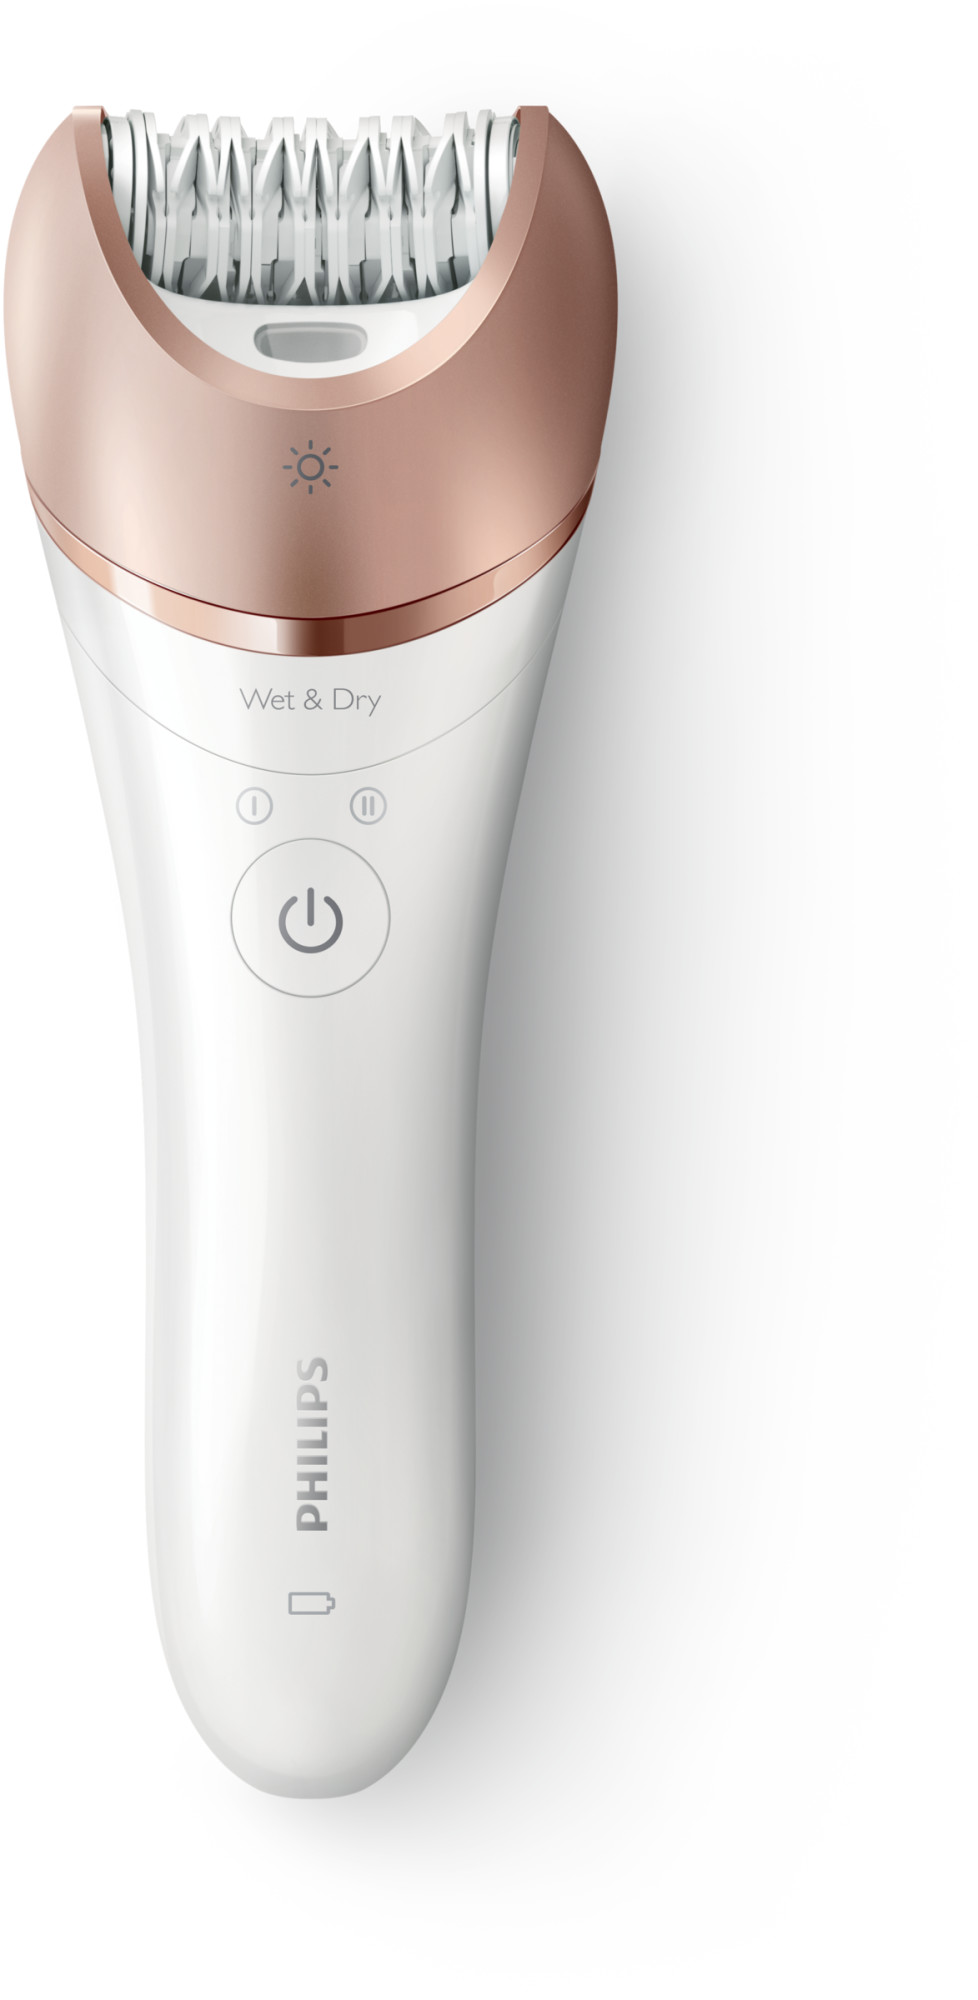 Philips Satinelle Prestige Epilator, Wet & Dry Electric Hair Removal, Body Exfoliation and Massage (Bre648) - image 3 of 14